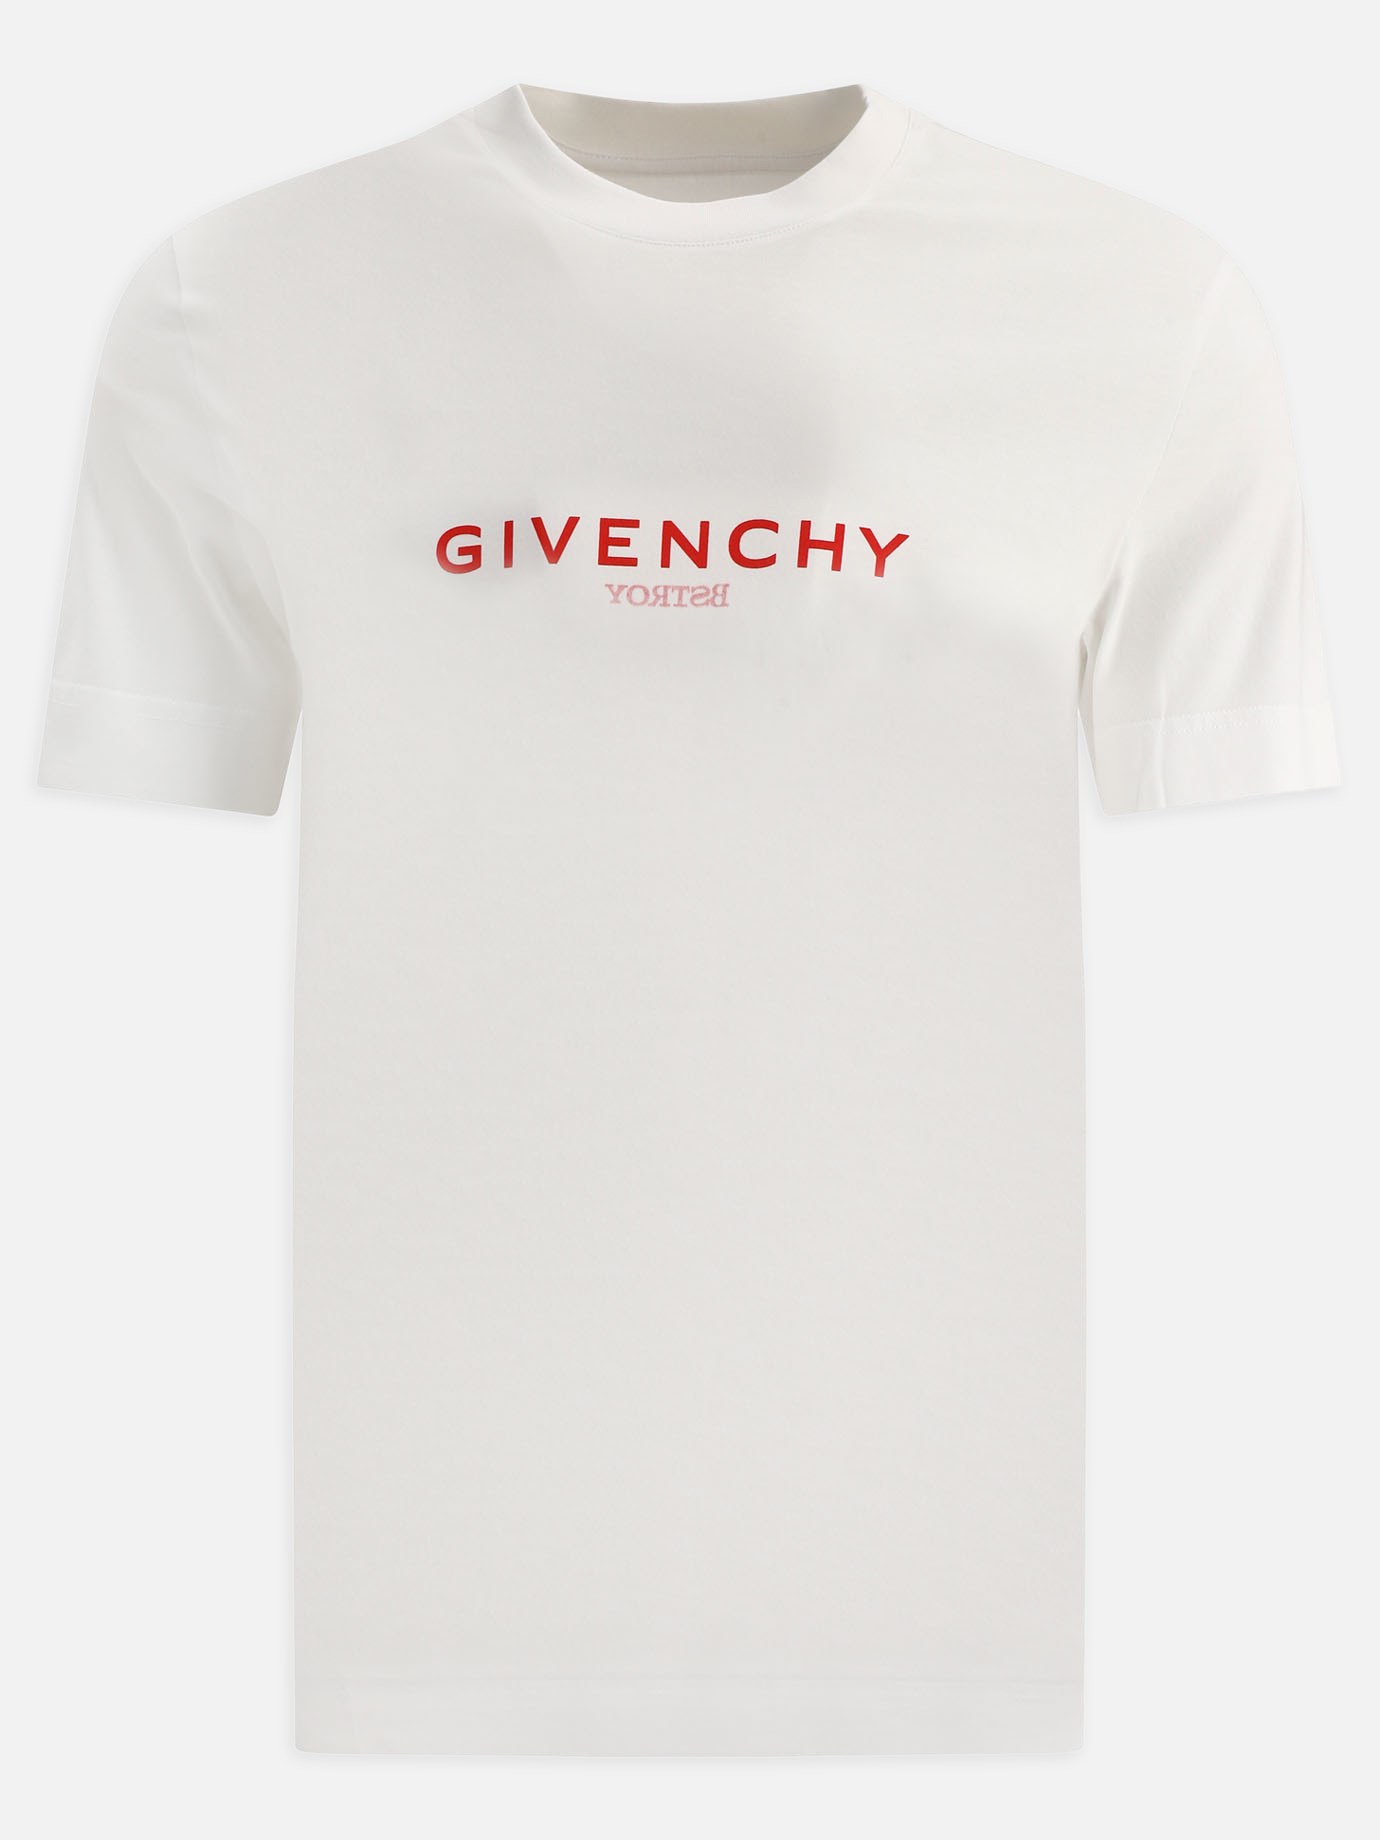 T-shirt reverse  BSTROY x Givenchy by Givenchy - 1